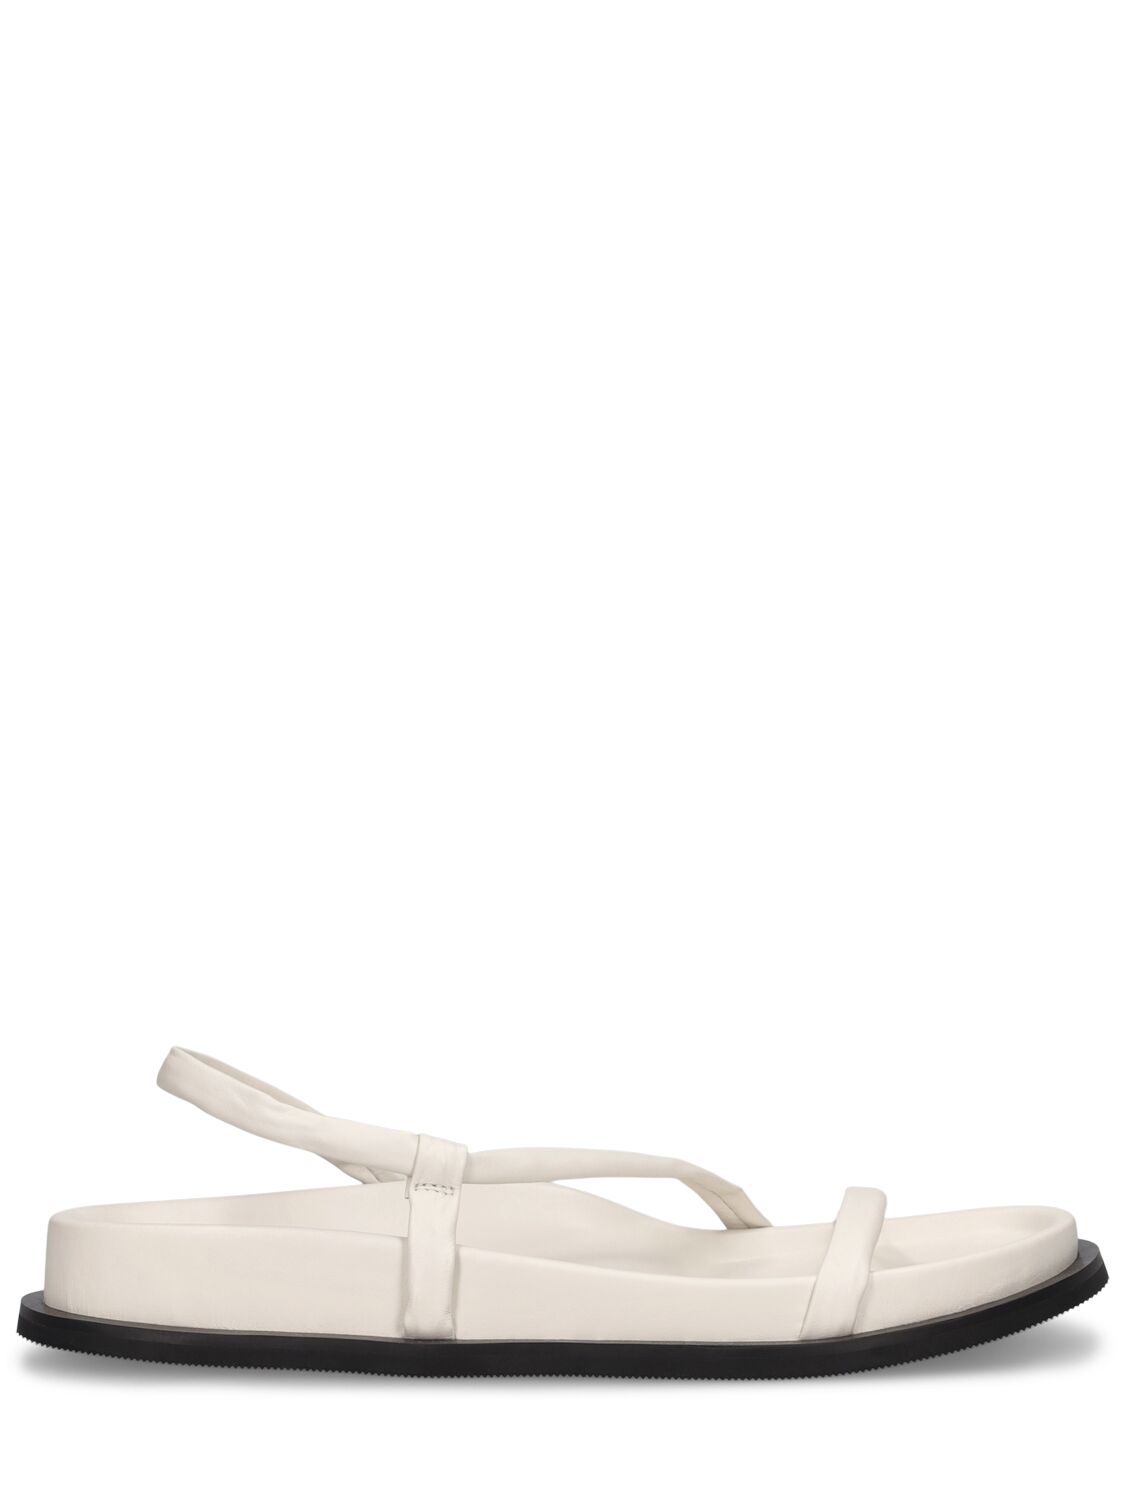 St.agni 25mm Twist Leather Sandals In White